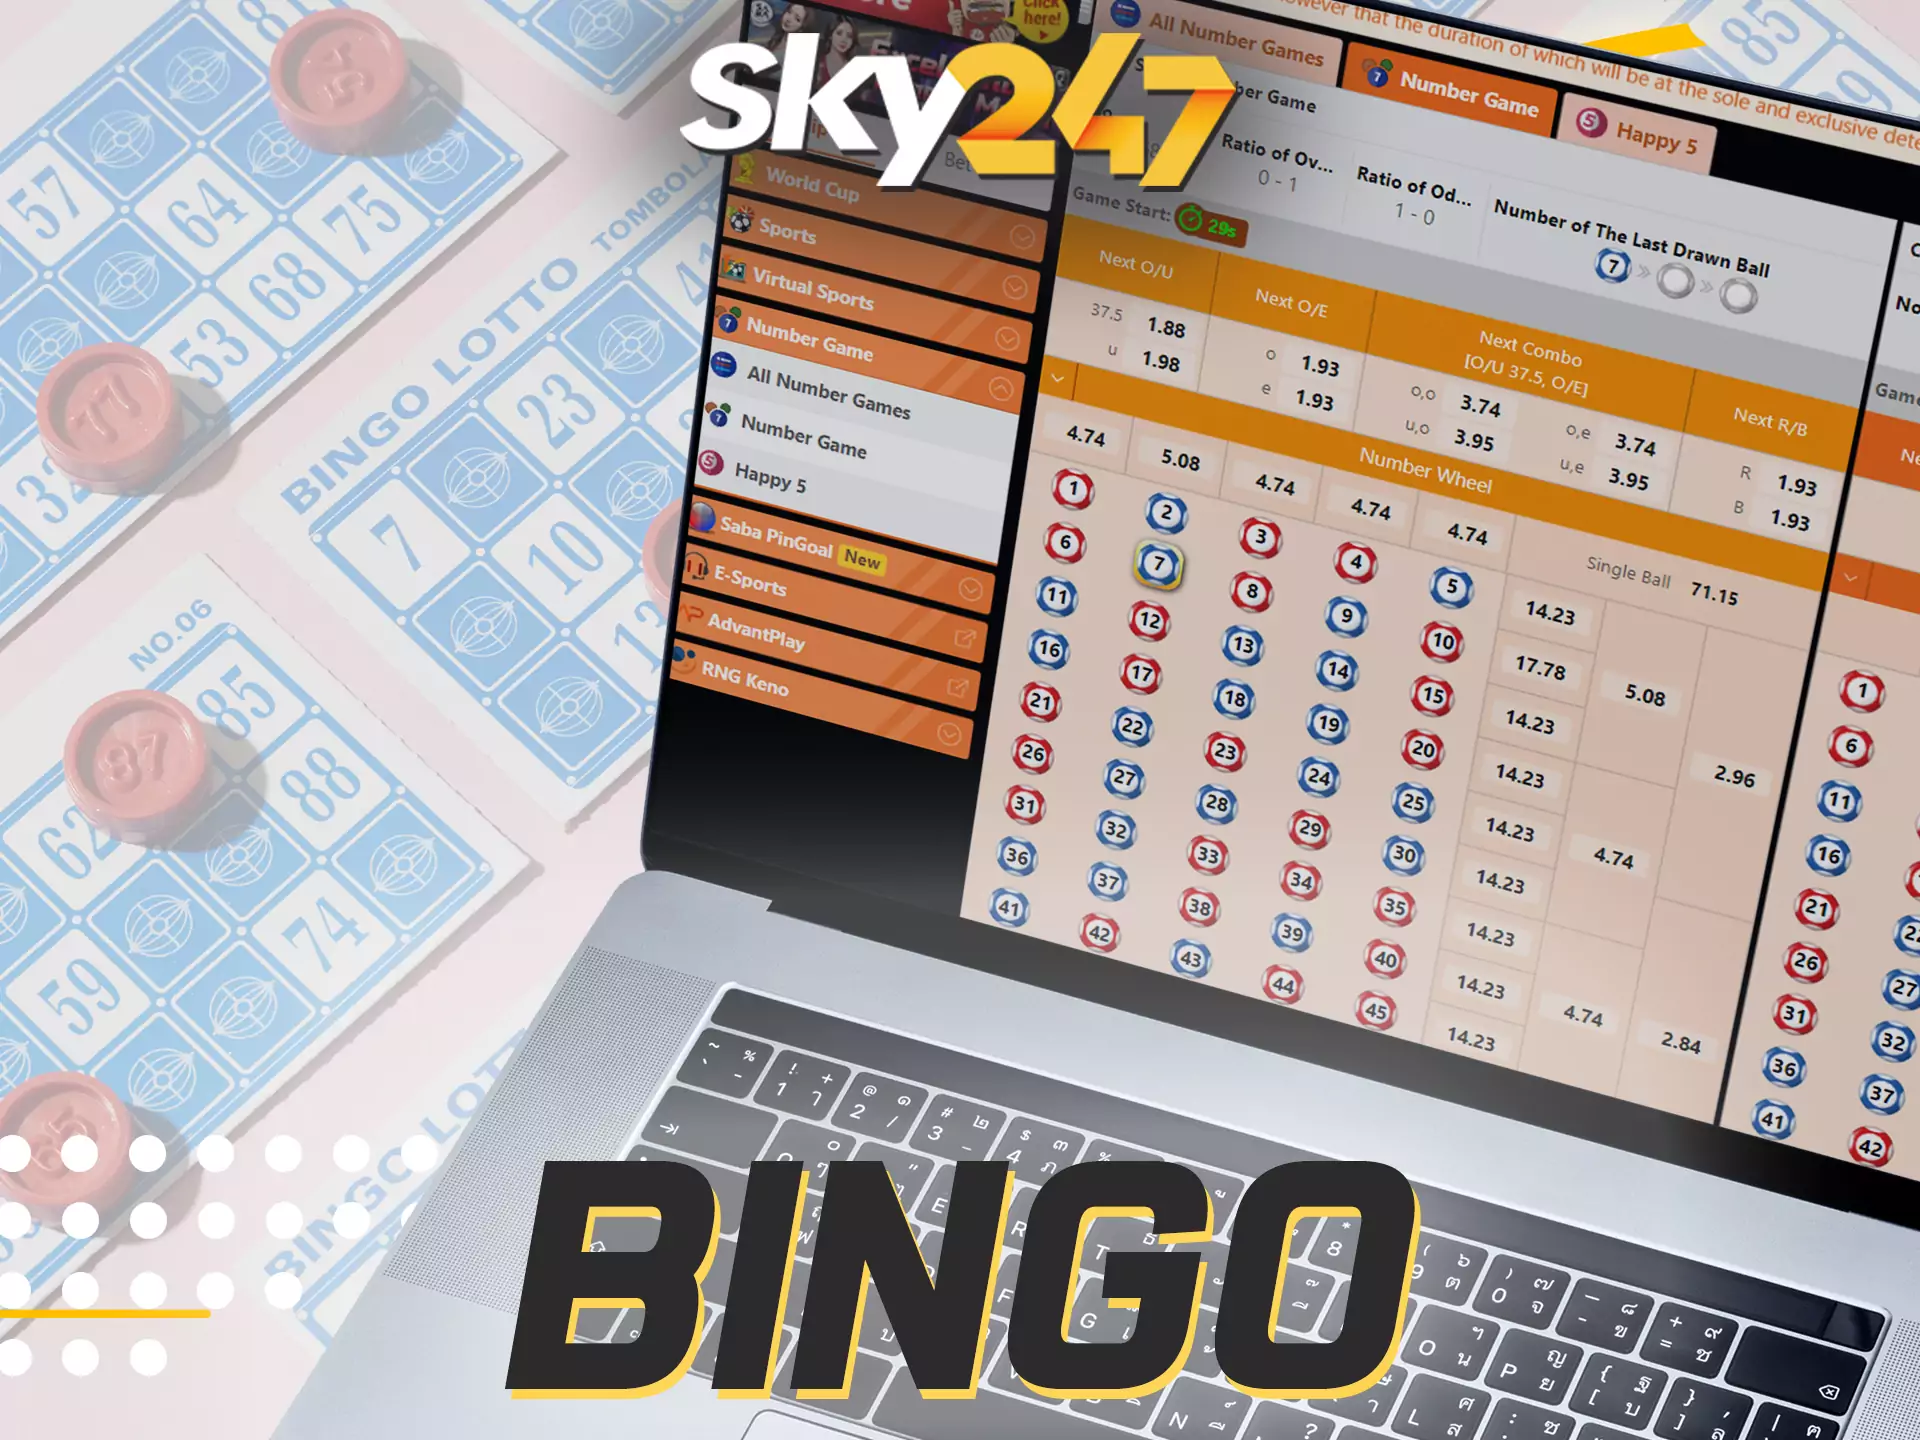 Besides betting and casino, you can play bingo games on Sky247.